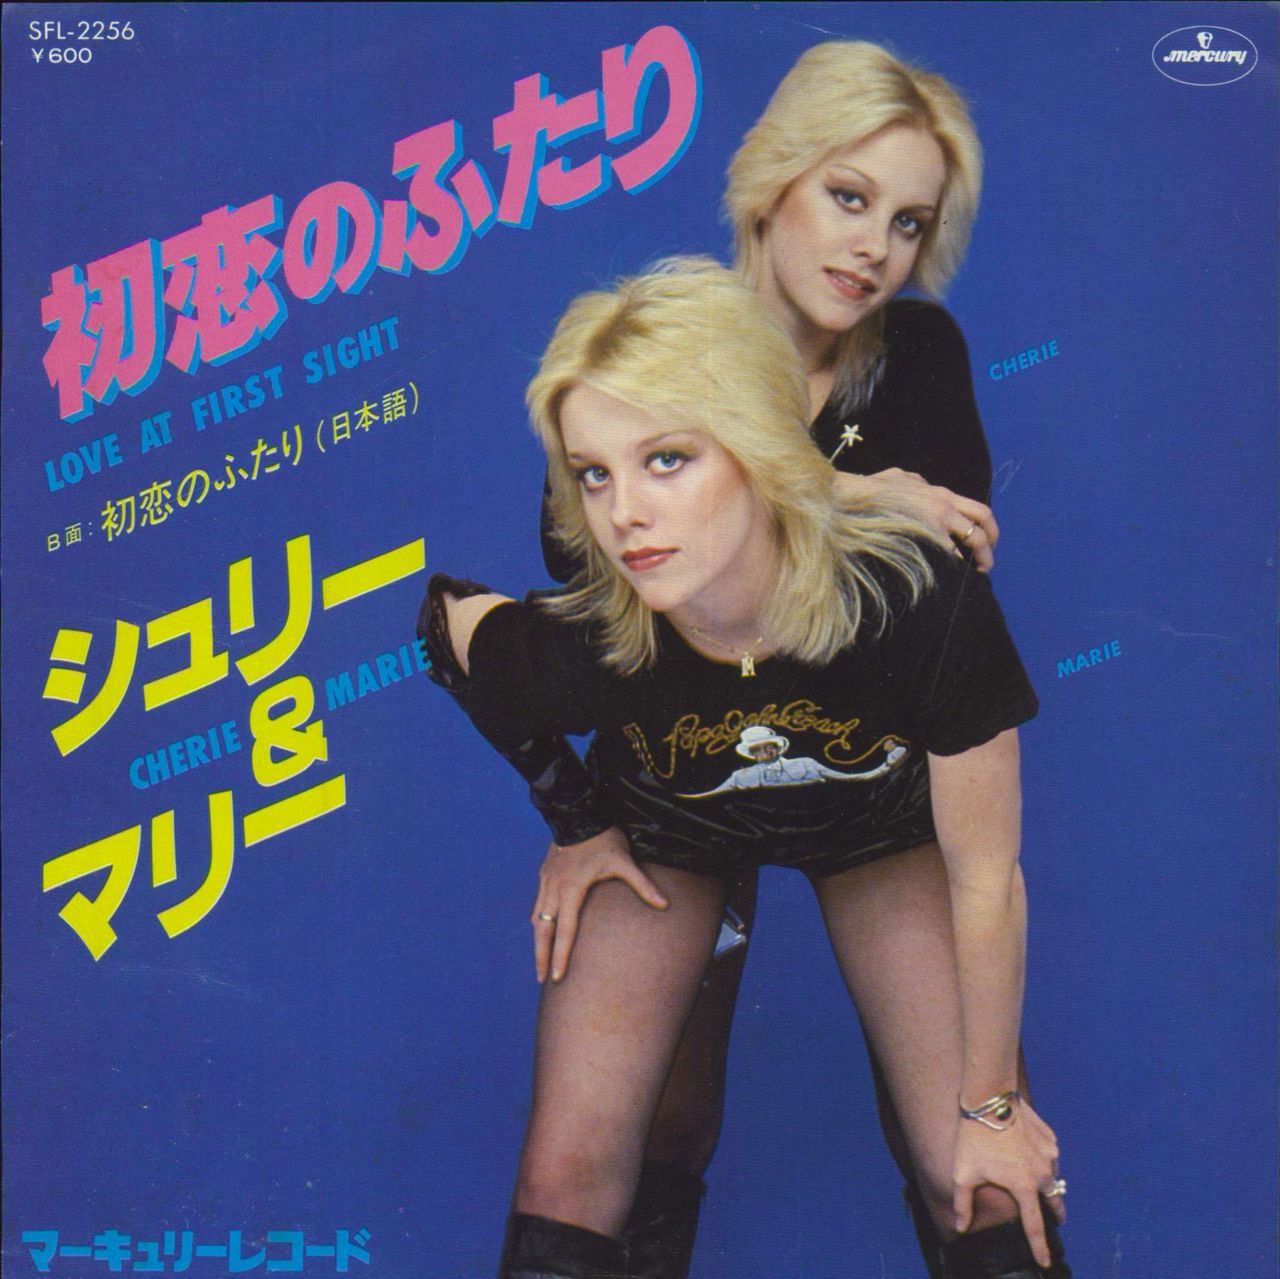 Cherie Currie Love At First Sight Japanese 7